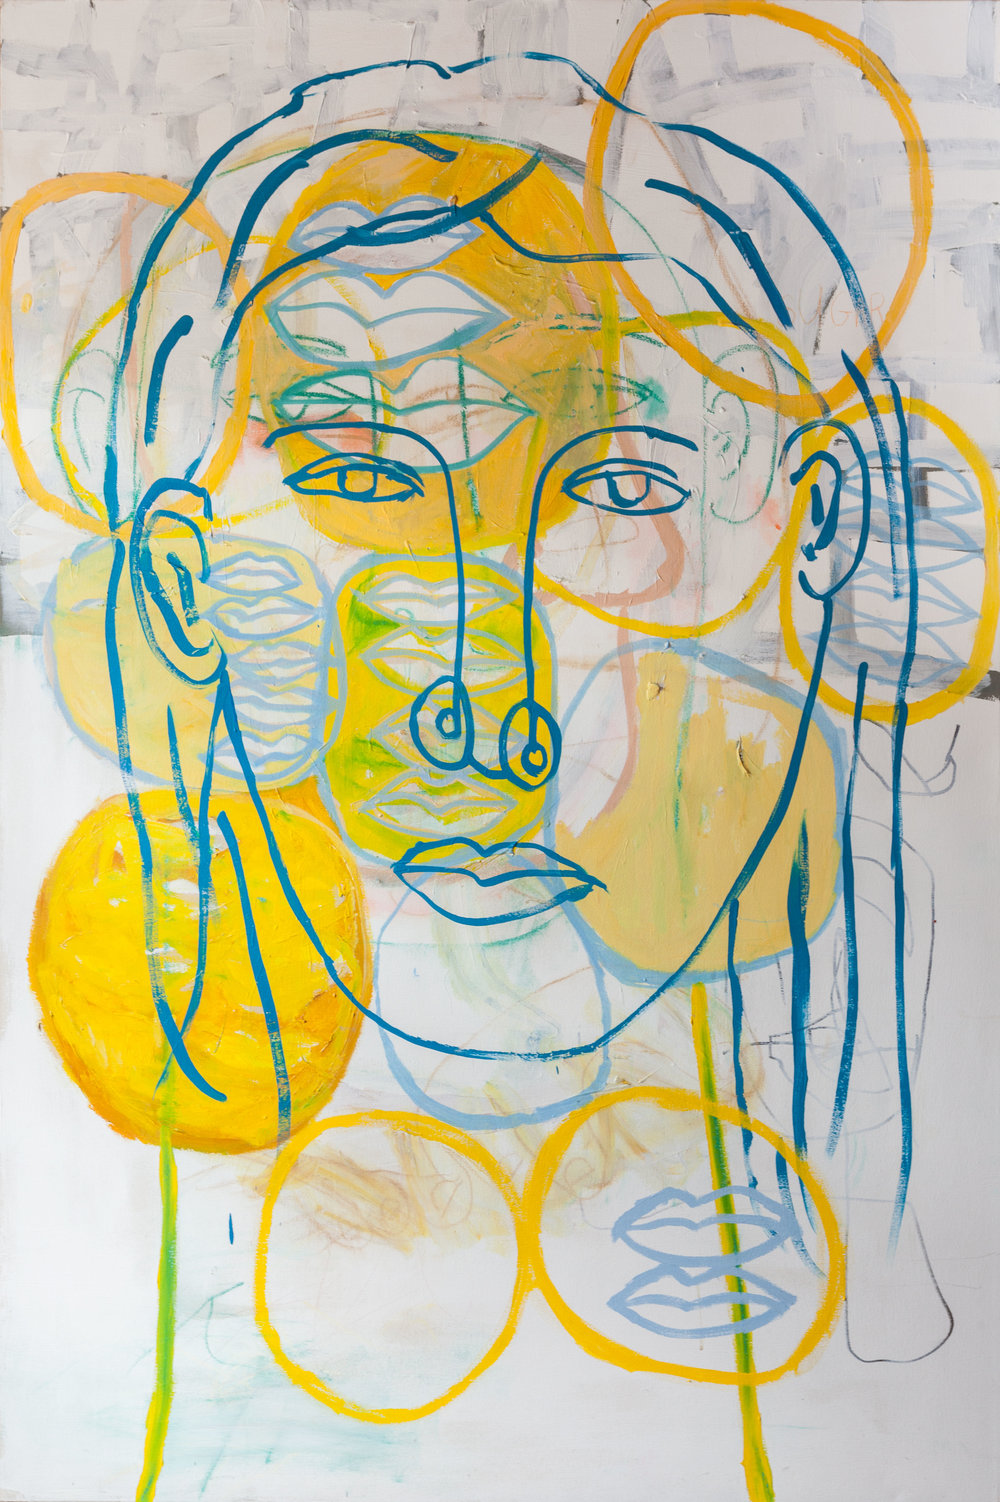 Woman’s Head - Acrylic and marker on canvas72 x 48 inches(Click on image for detail)